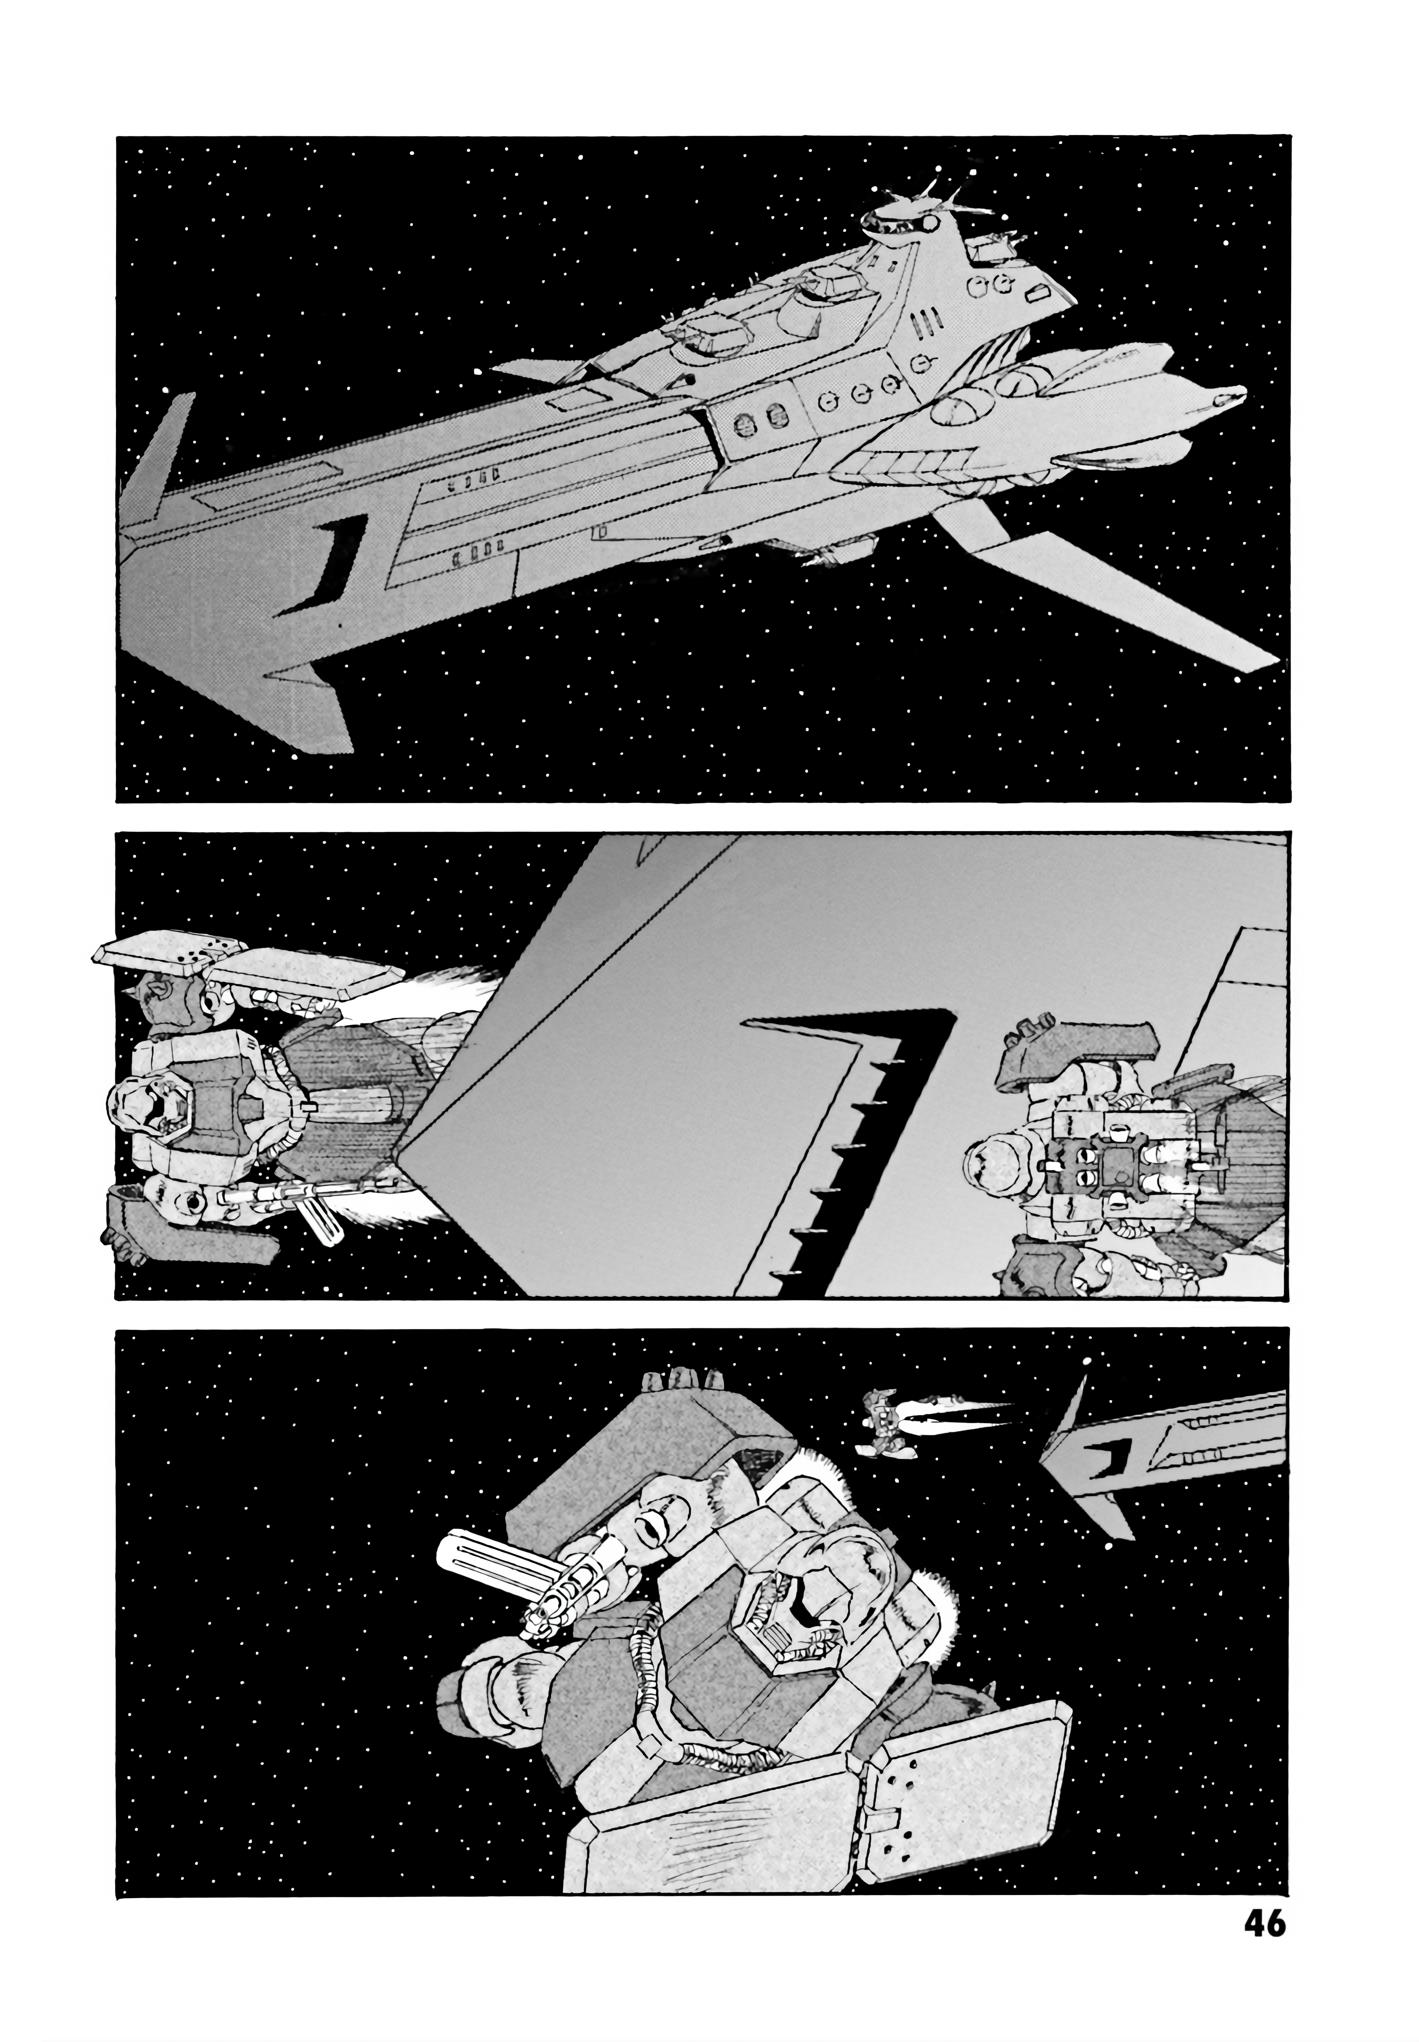 Mobile Suit Gundam: The Revival Of Zeon - Remnant One Vol.1 Chapter 3: Sortie - Picture 3